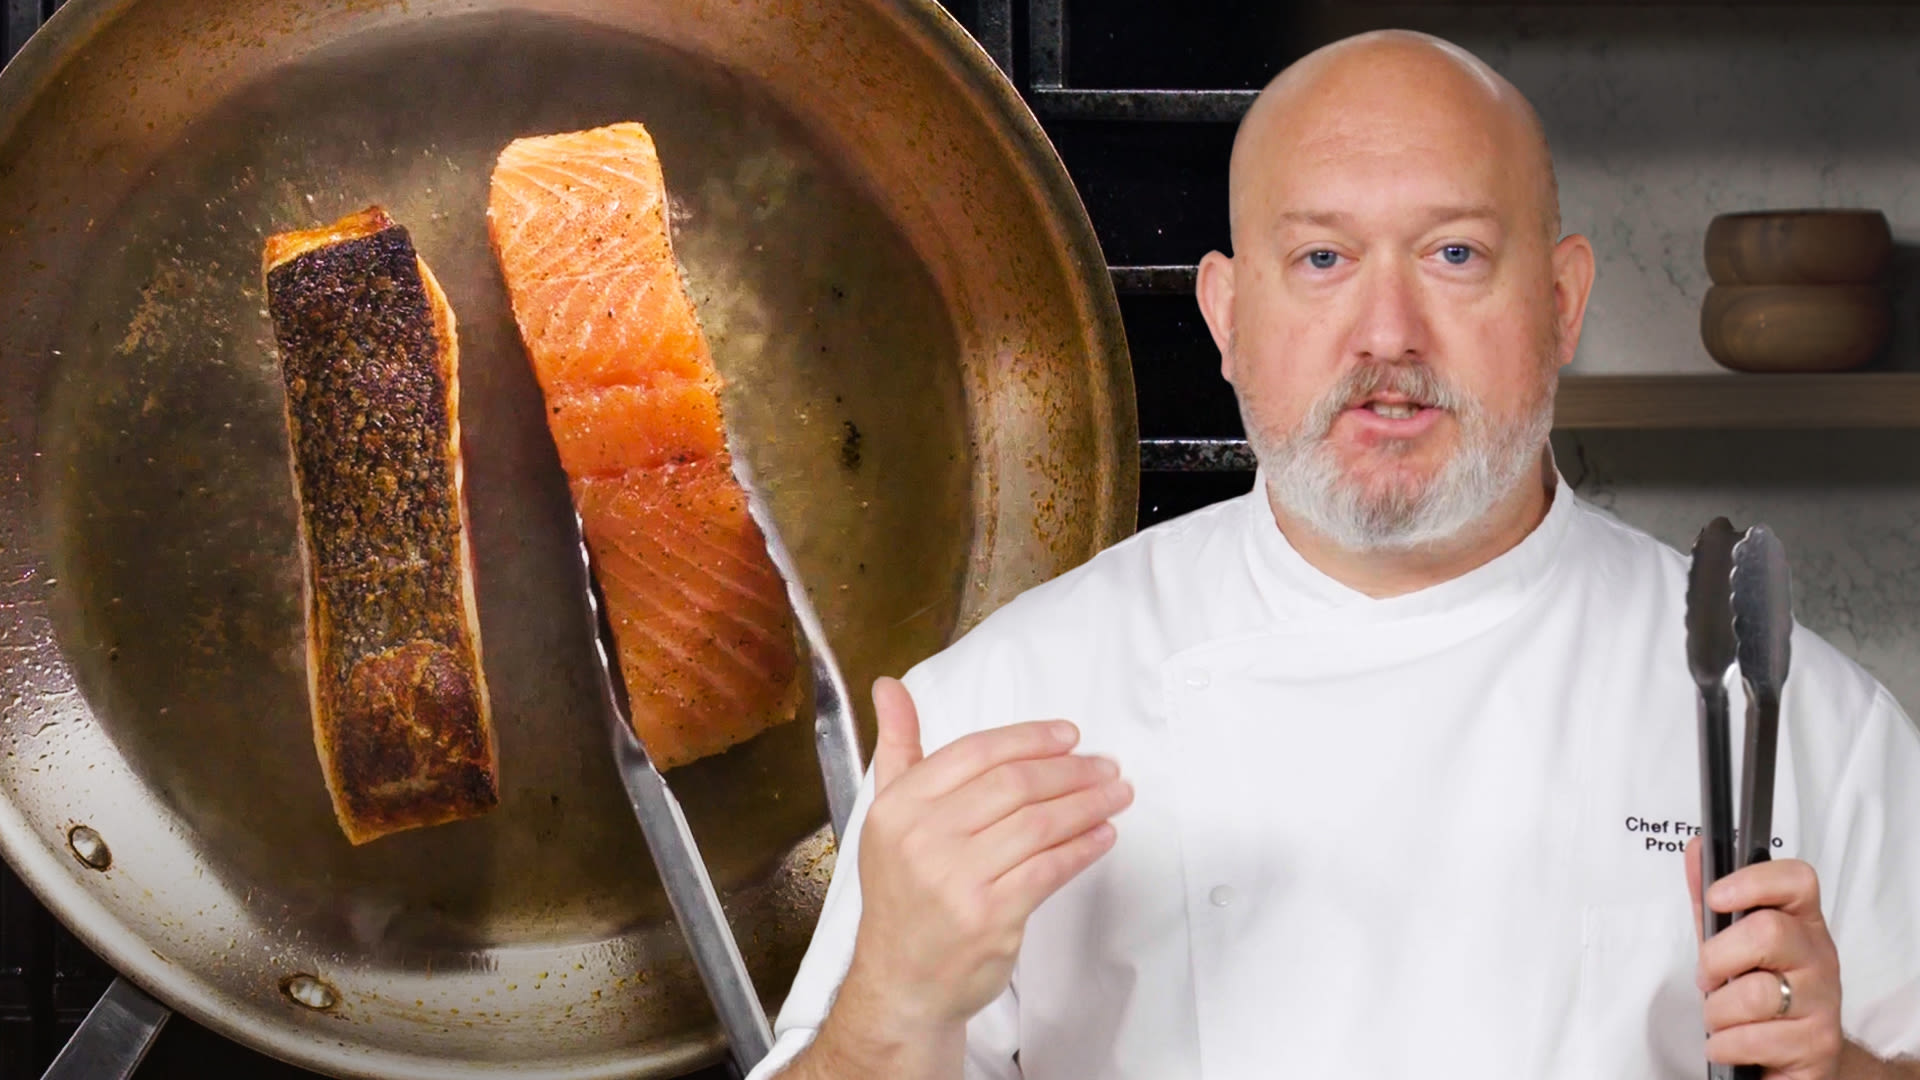 Restaurant-Style Pan Seared Salmon - Once Upon a Chef